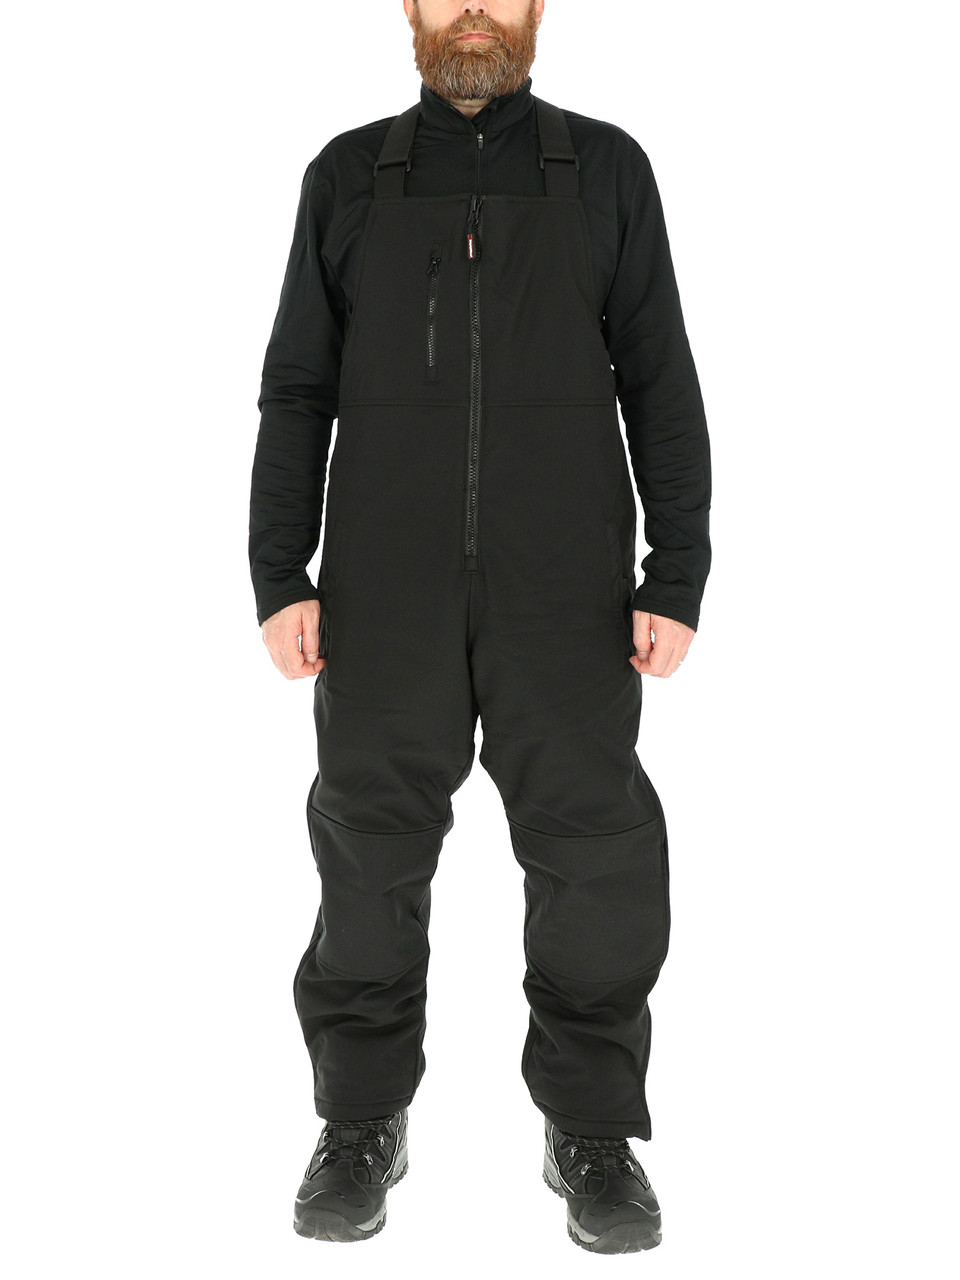 Insulated Softshell Bib Overalls (495) | Rated for -20°F | RefrigiWear